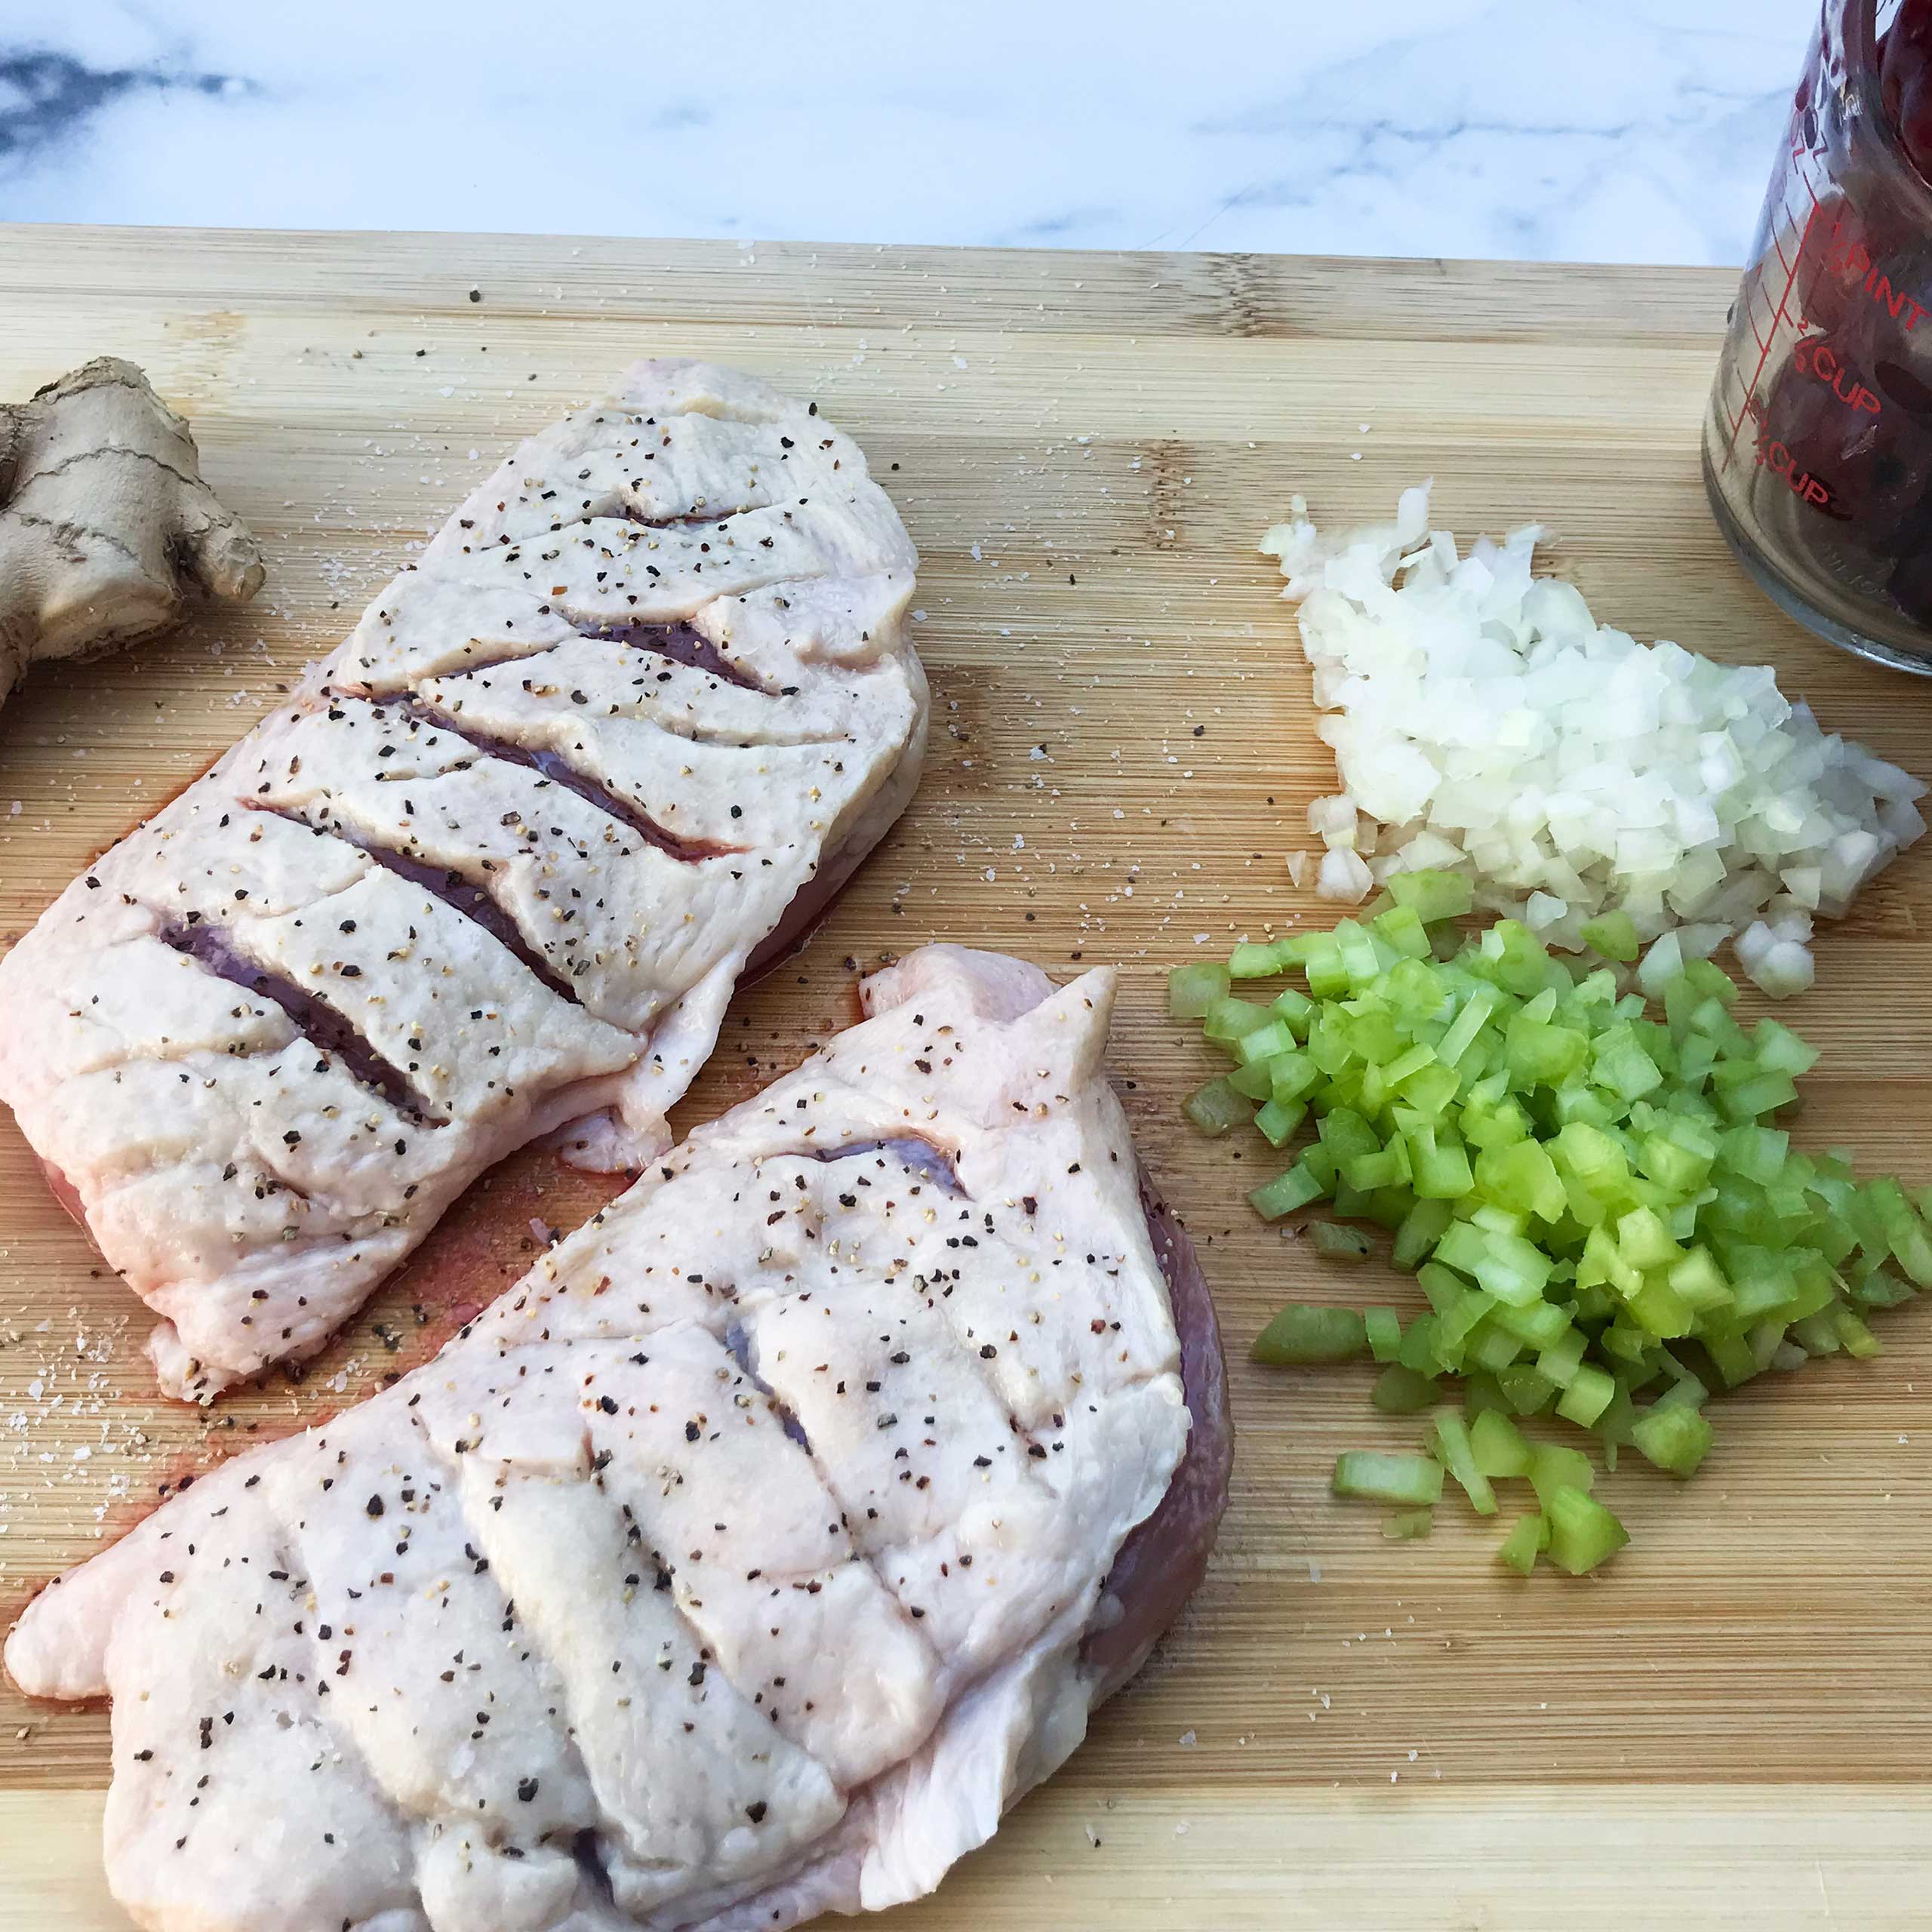 raw duck breasts with diamond pattern slits in skin on board with other ingredients